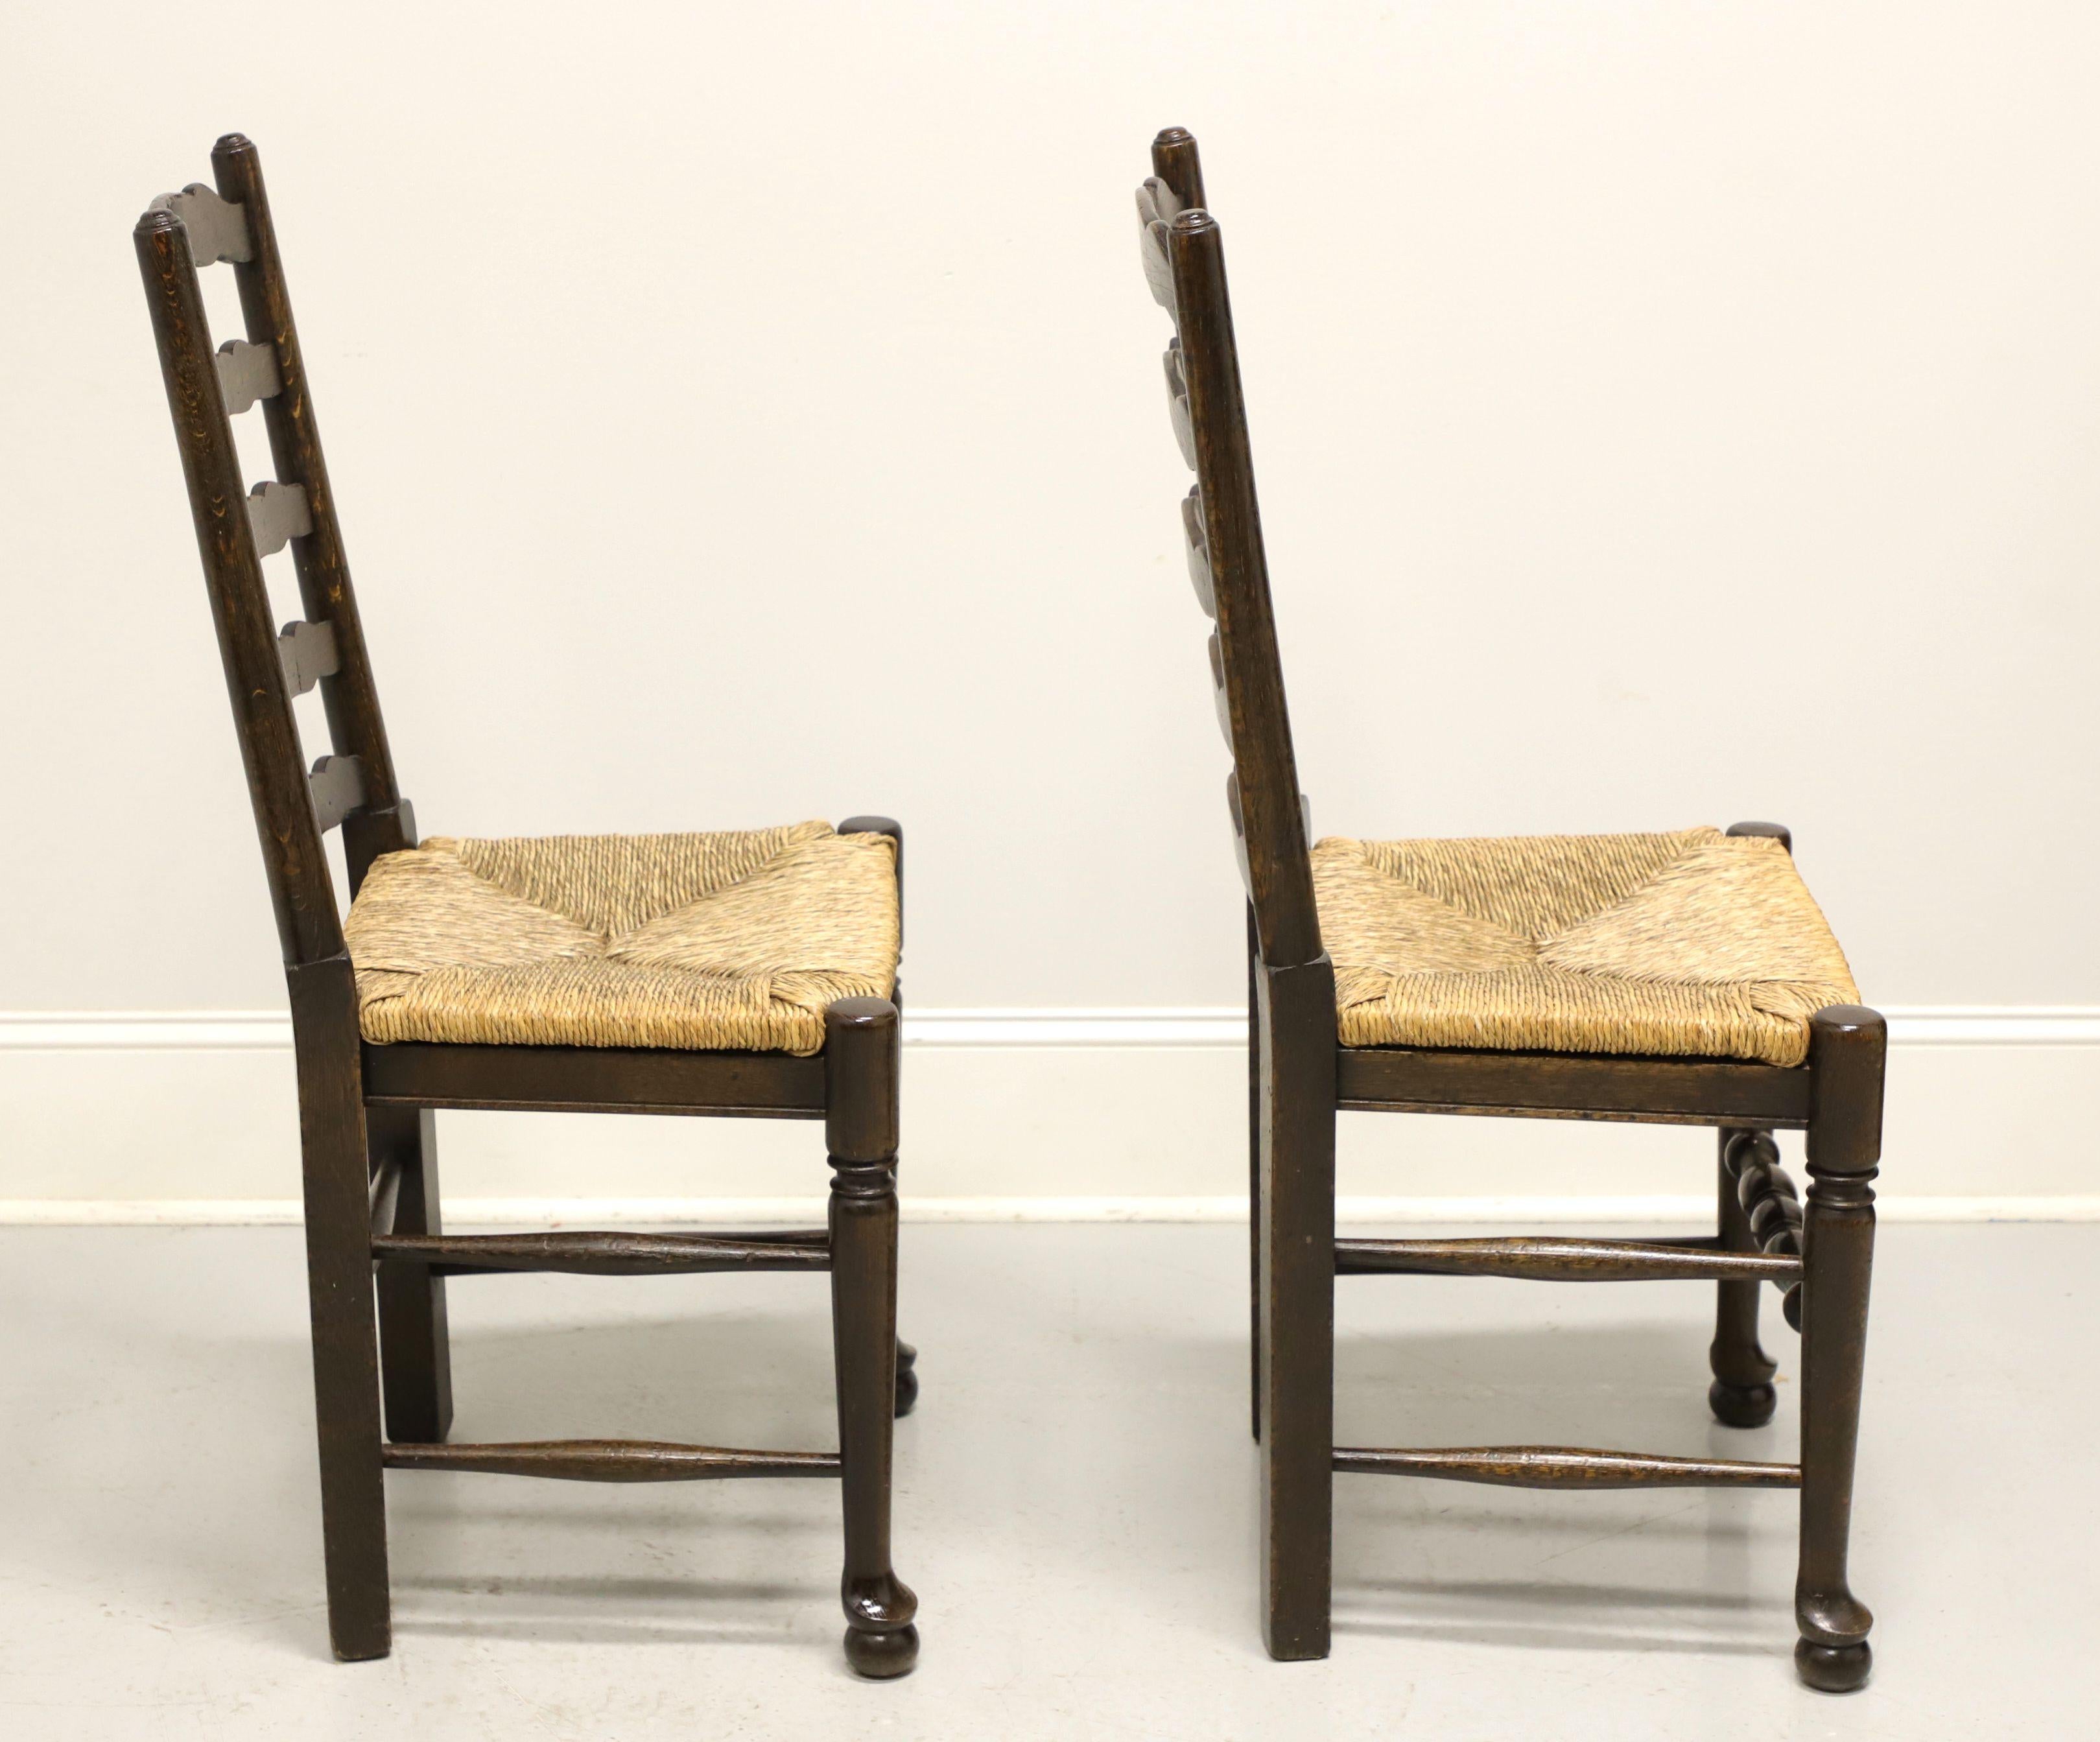 American Mid 20th Century Ladder Back Side Chairs with Rush Seats - Pair A